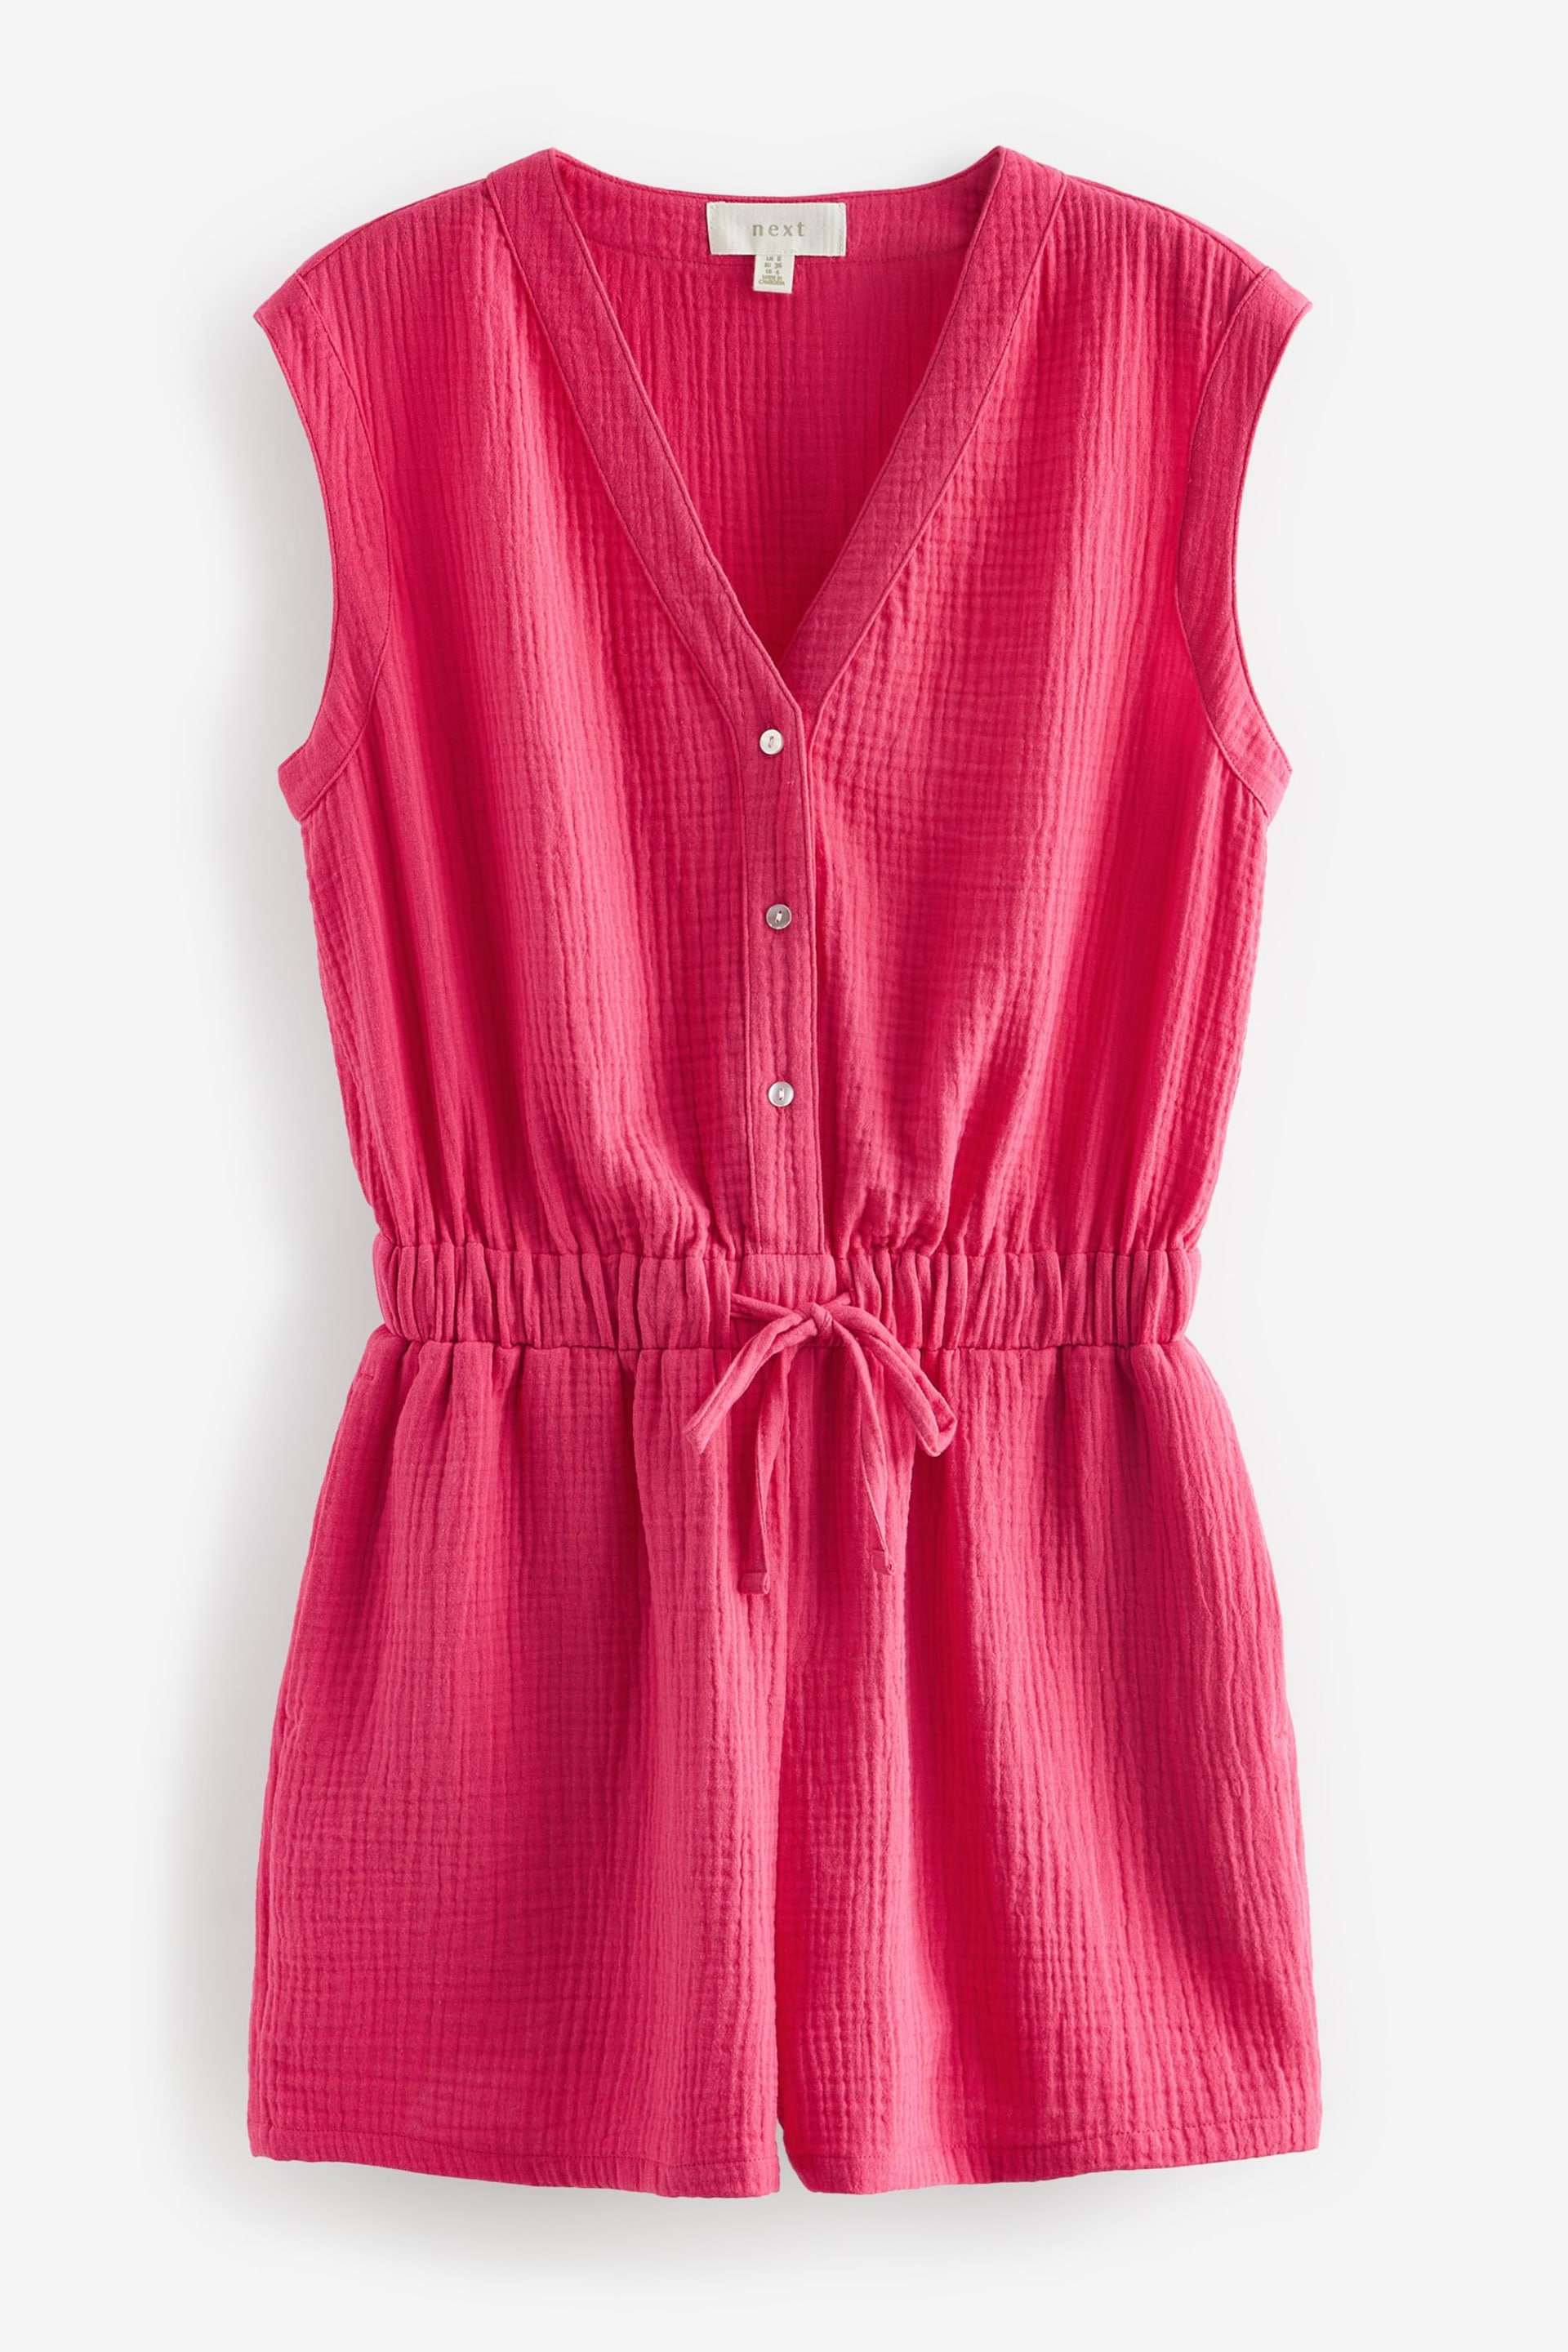 Bright Pink Textured Summer Playsuit - Image 5 of 6